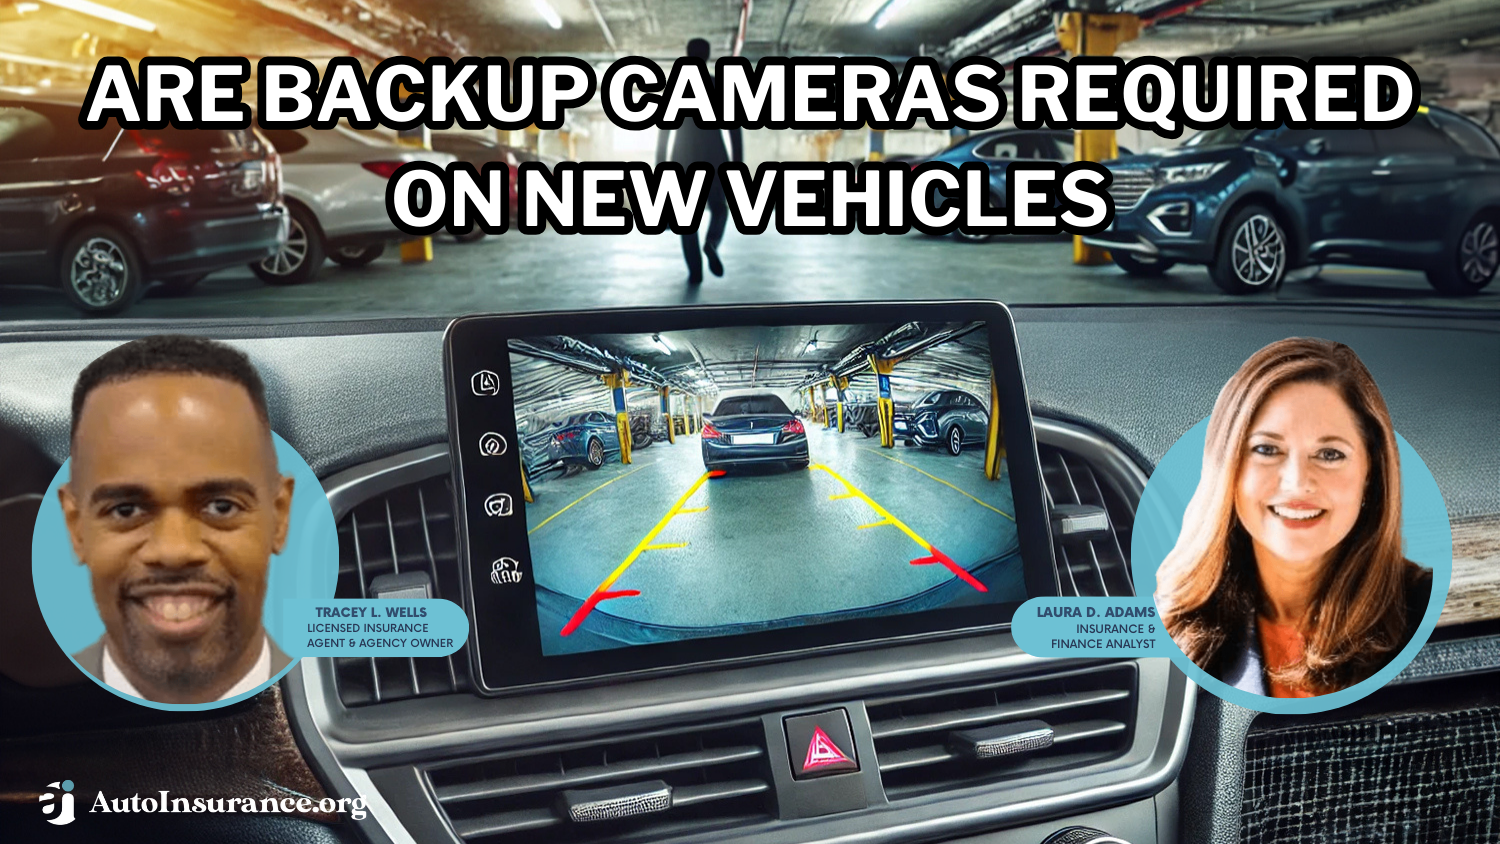 Are backup cameras required on new vehicles?